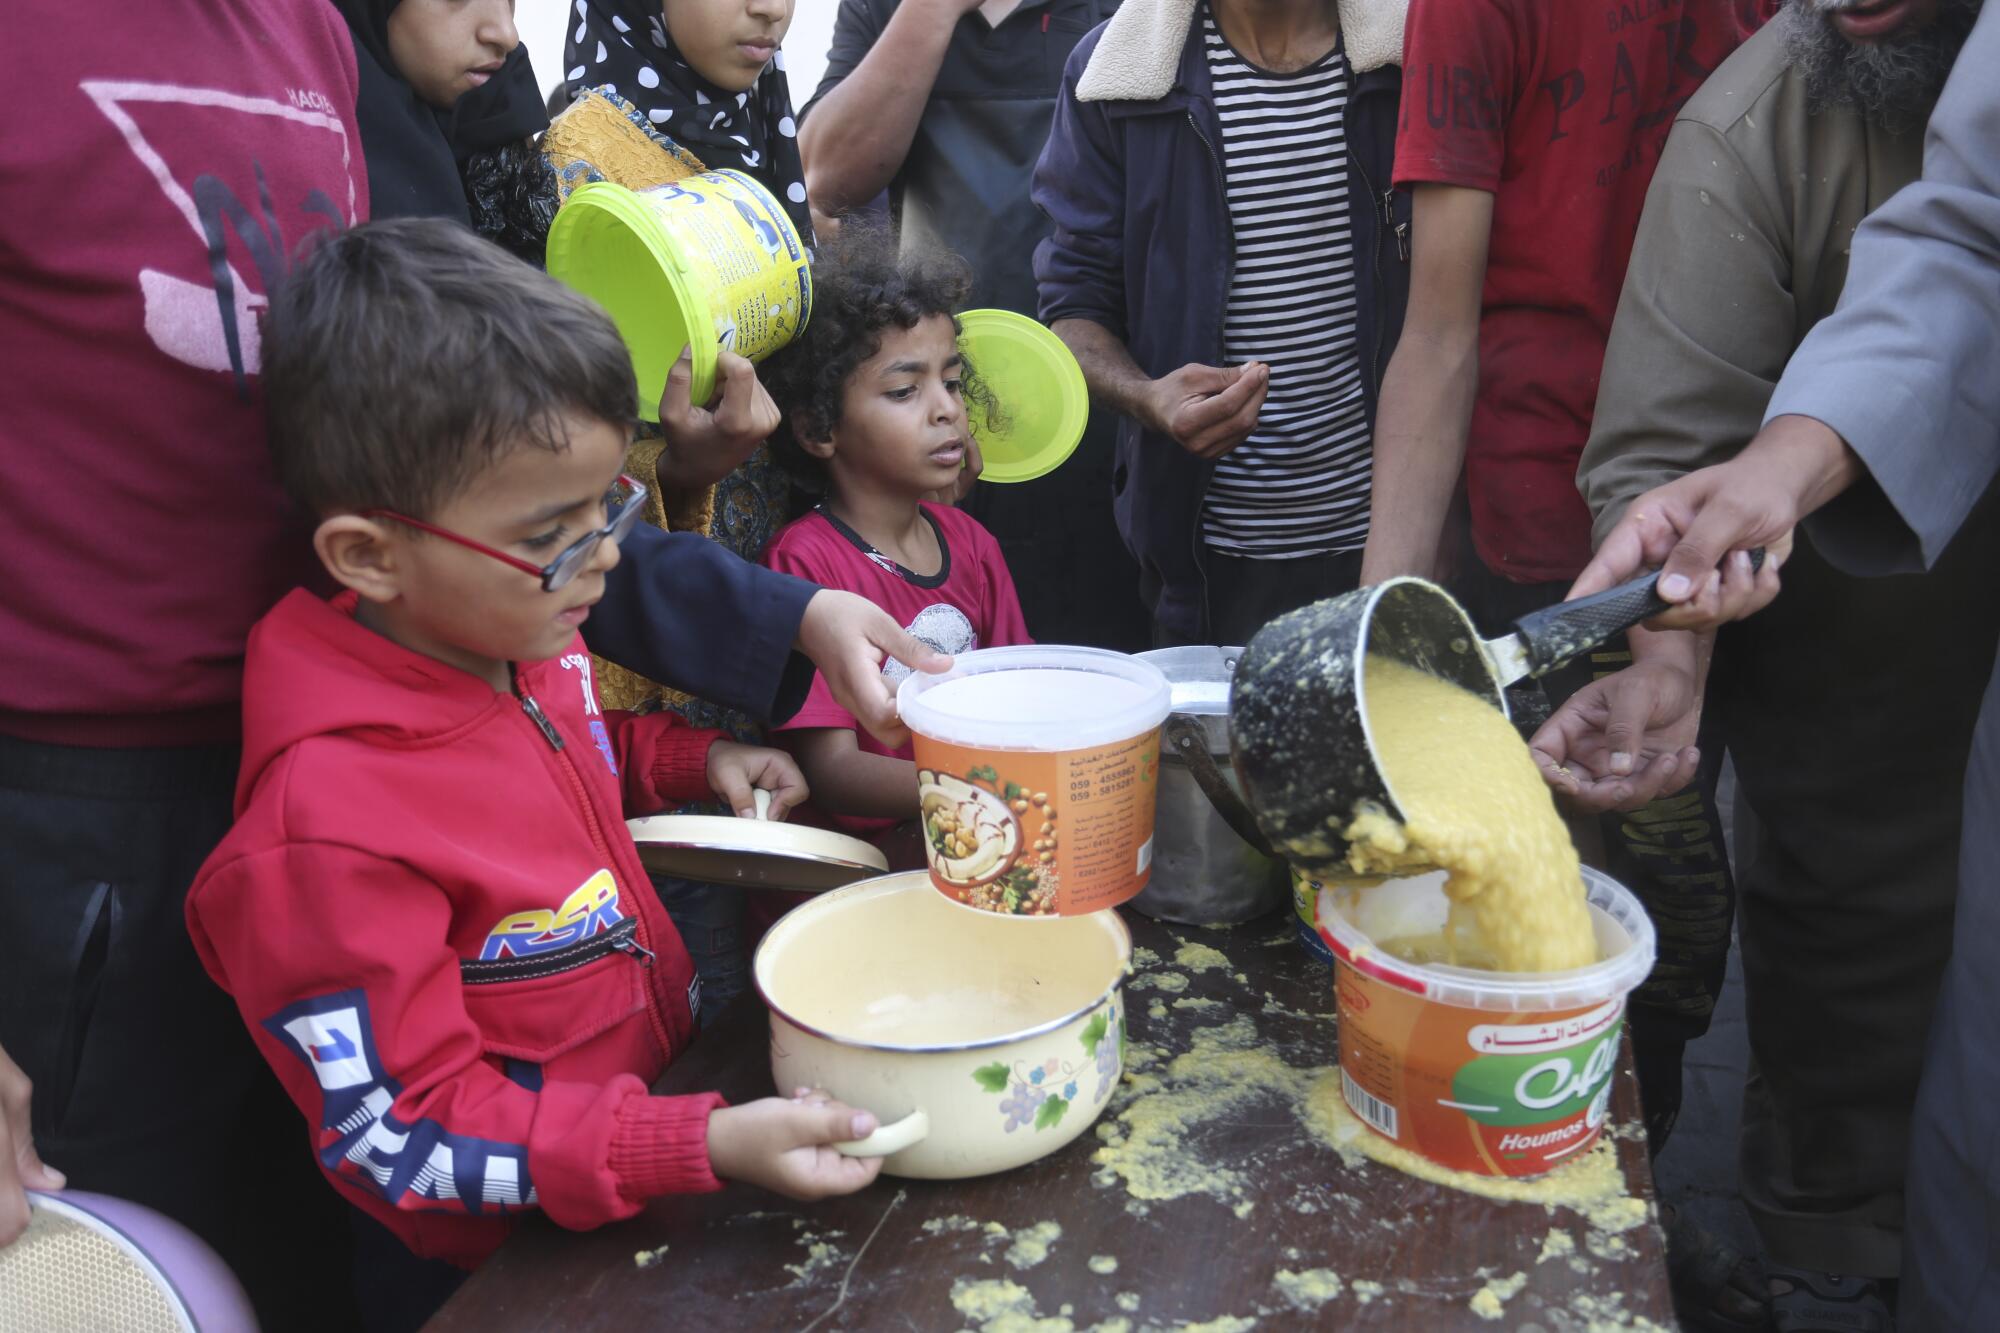 Children wait with adults as a person pours a yellow liquid into buckets 